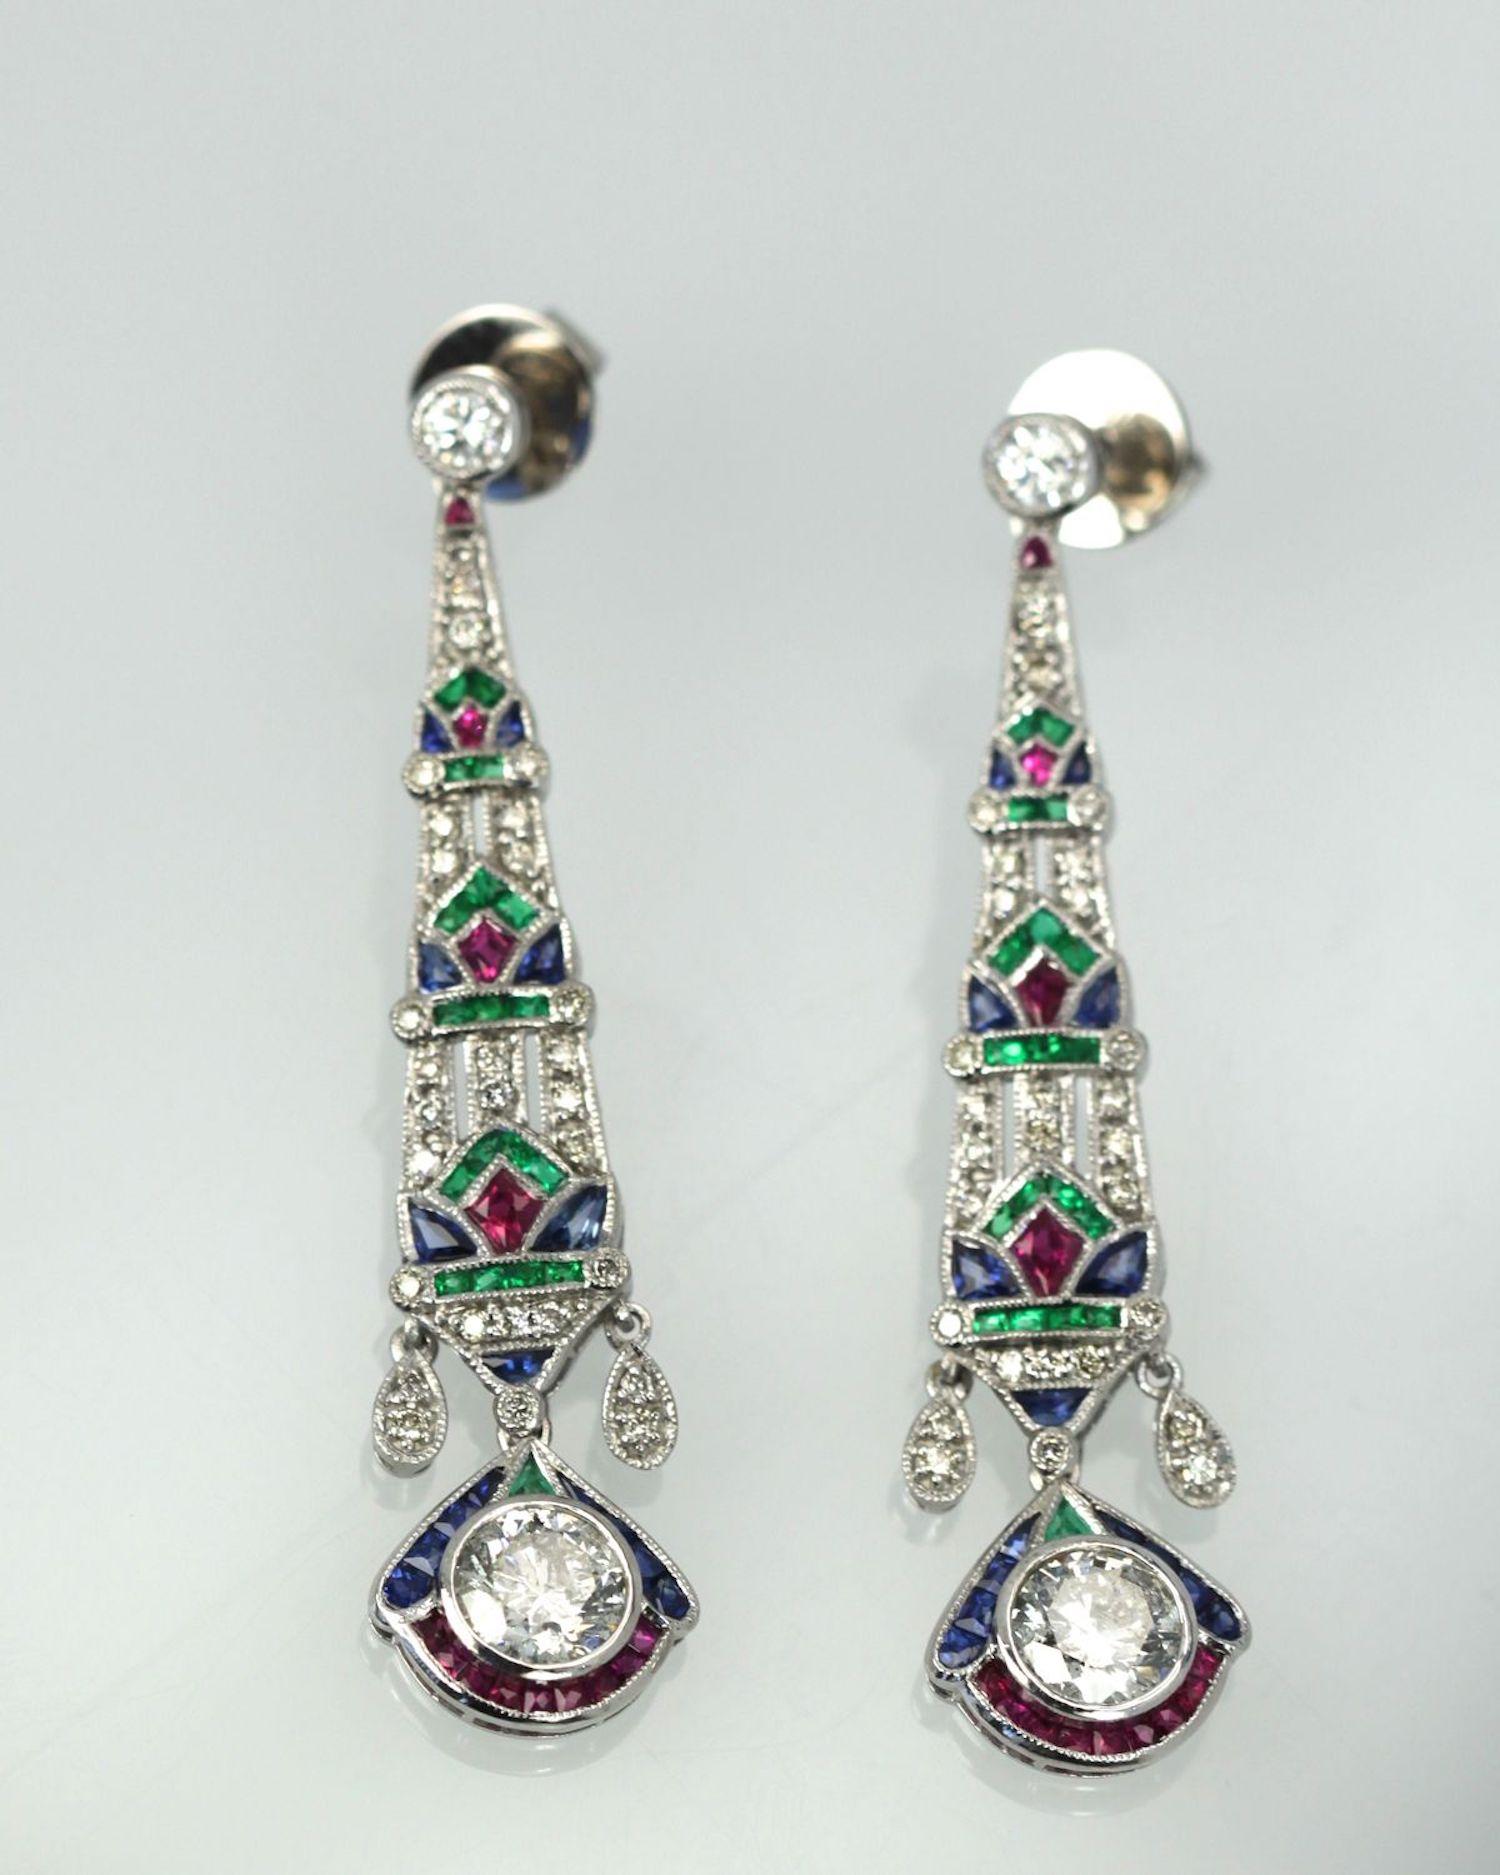 These earrings are made in Platinum and feature Emeralds, Rubies Sapphires and Diamonds.  They are 2 1/4